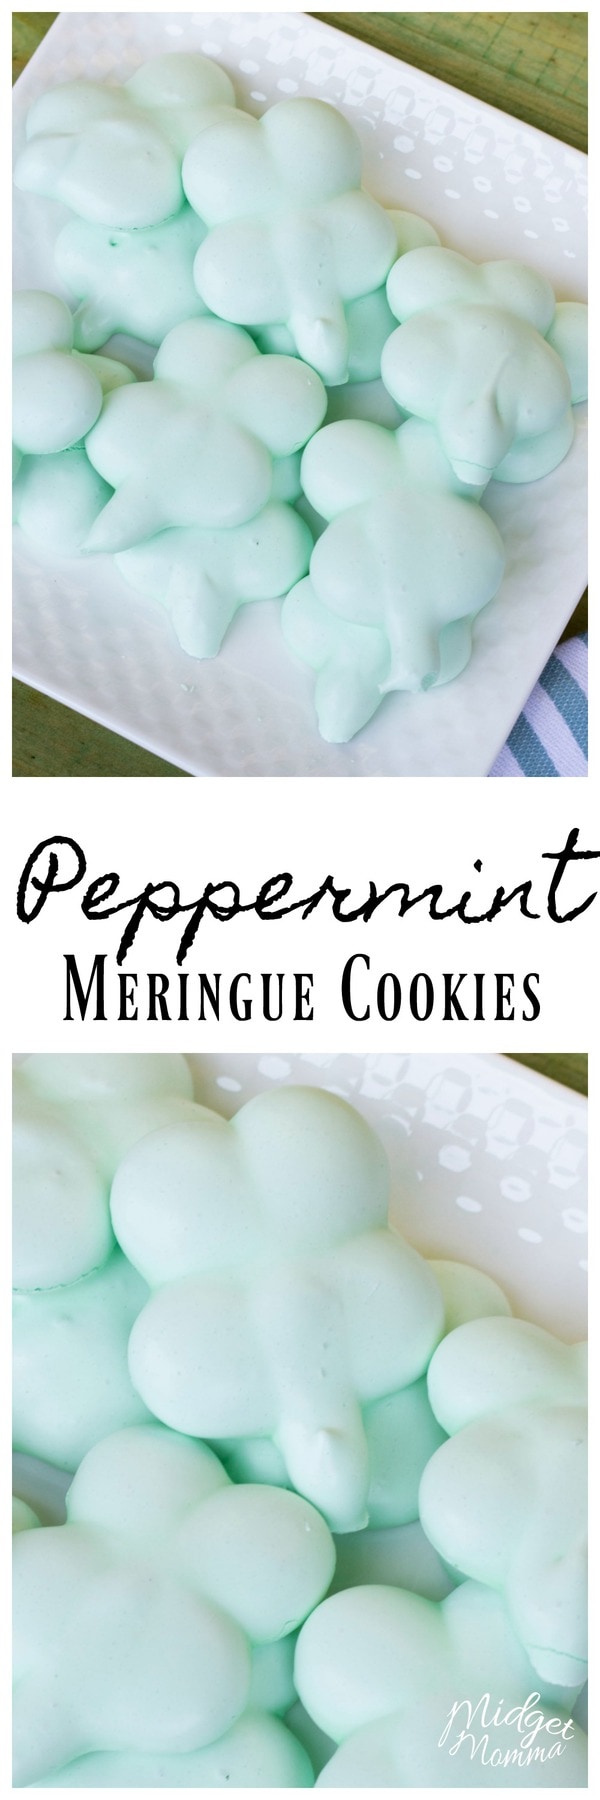 Peppermint Meringues- MidgetMomma. This peppermint cookie is light and airy with an amazing peppermint flavor